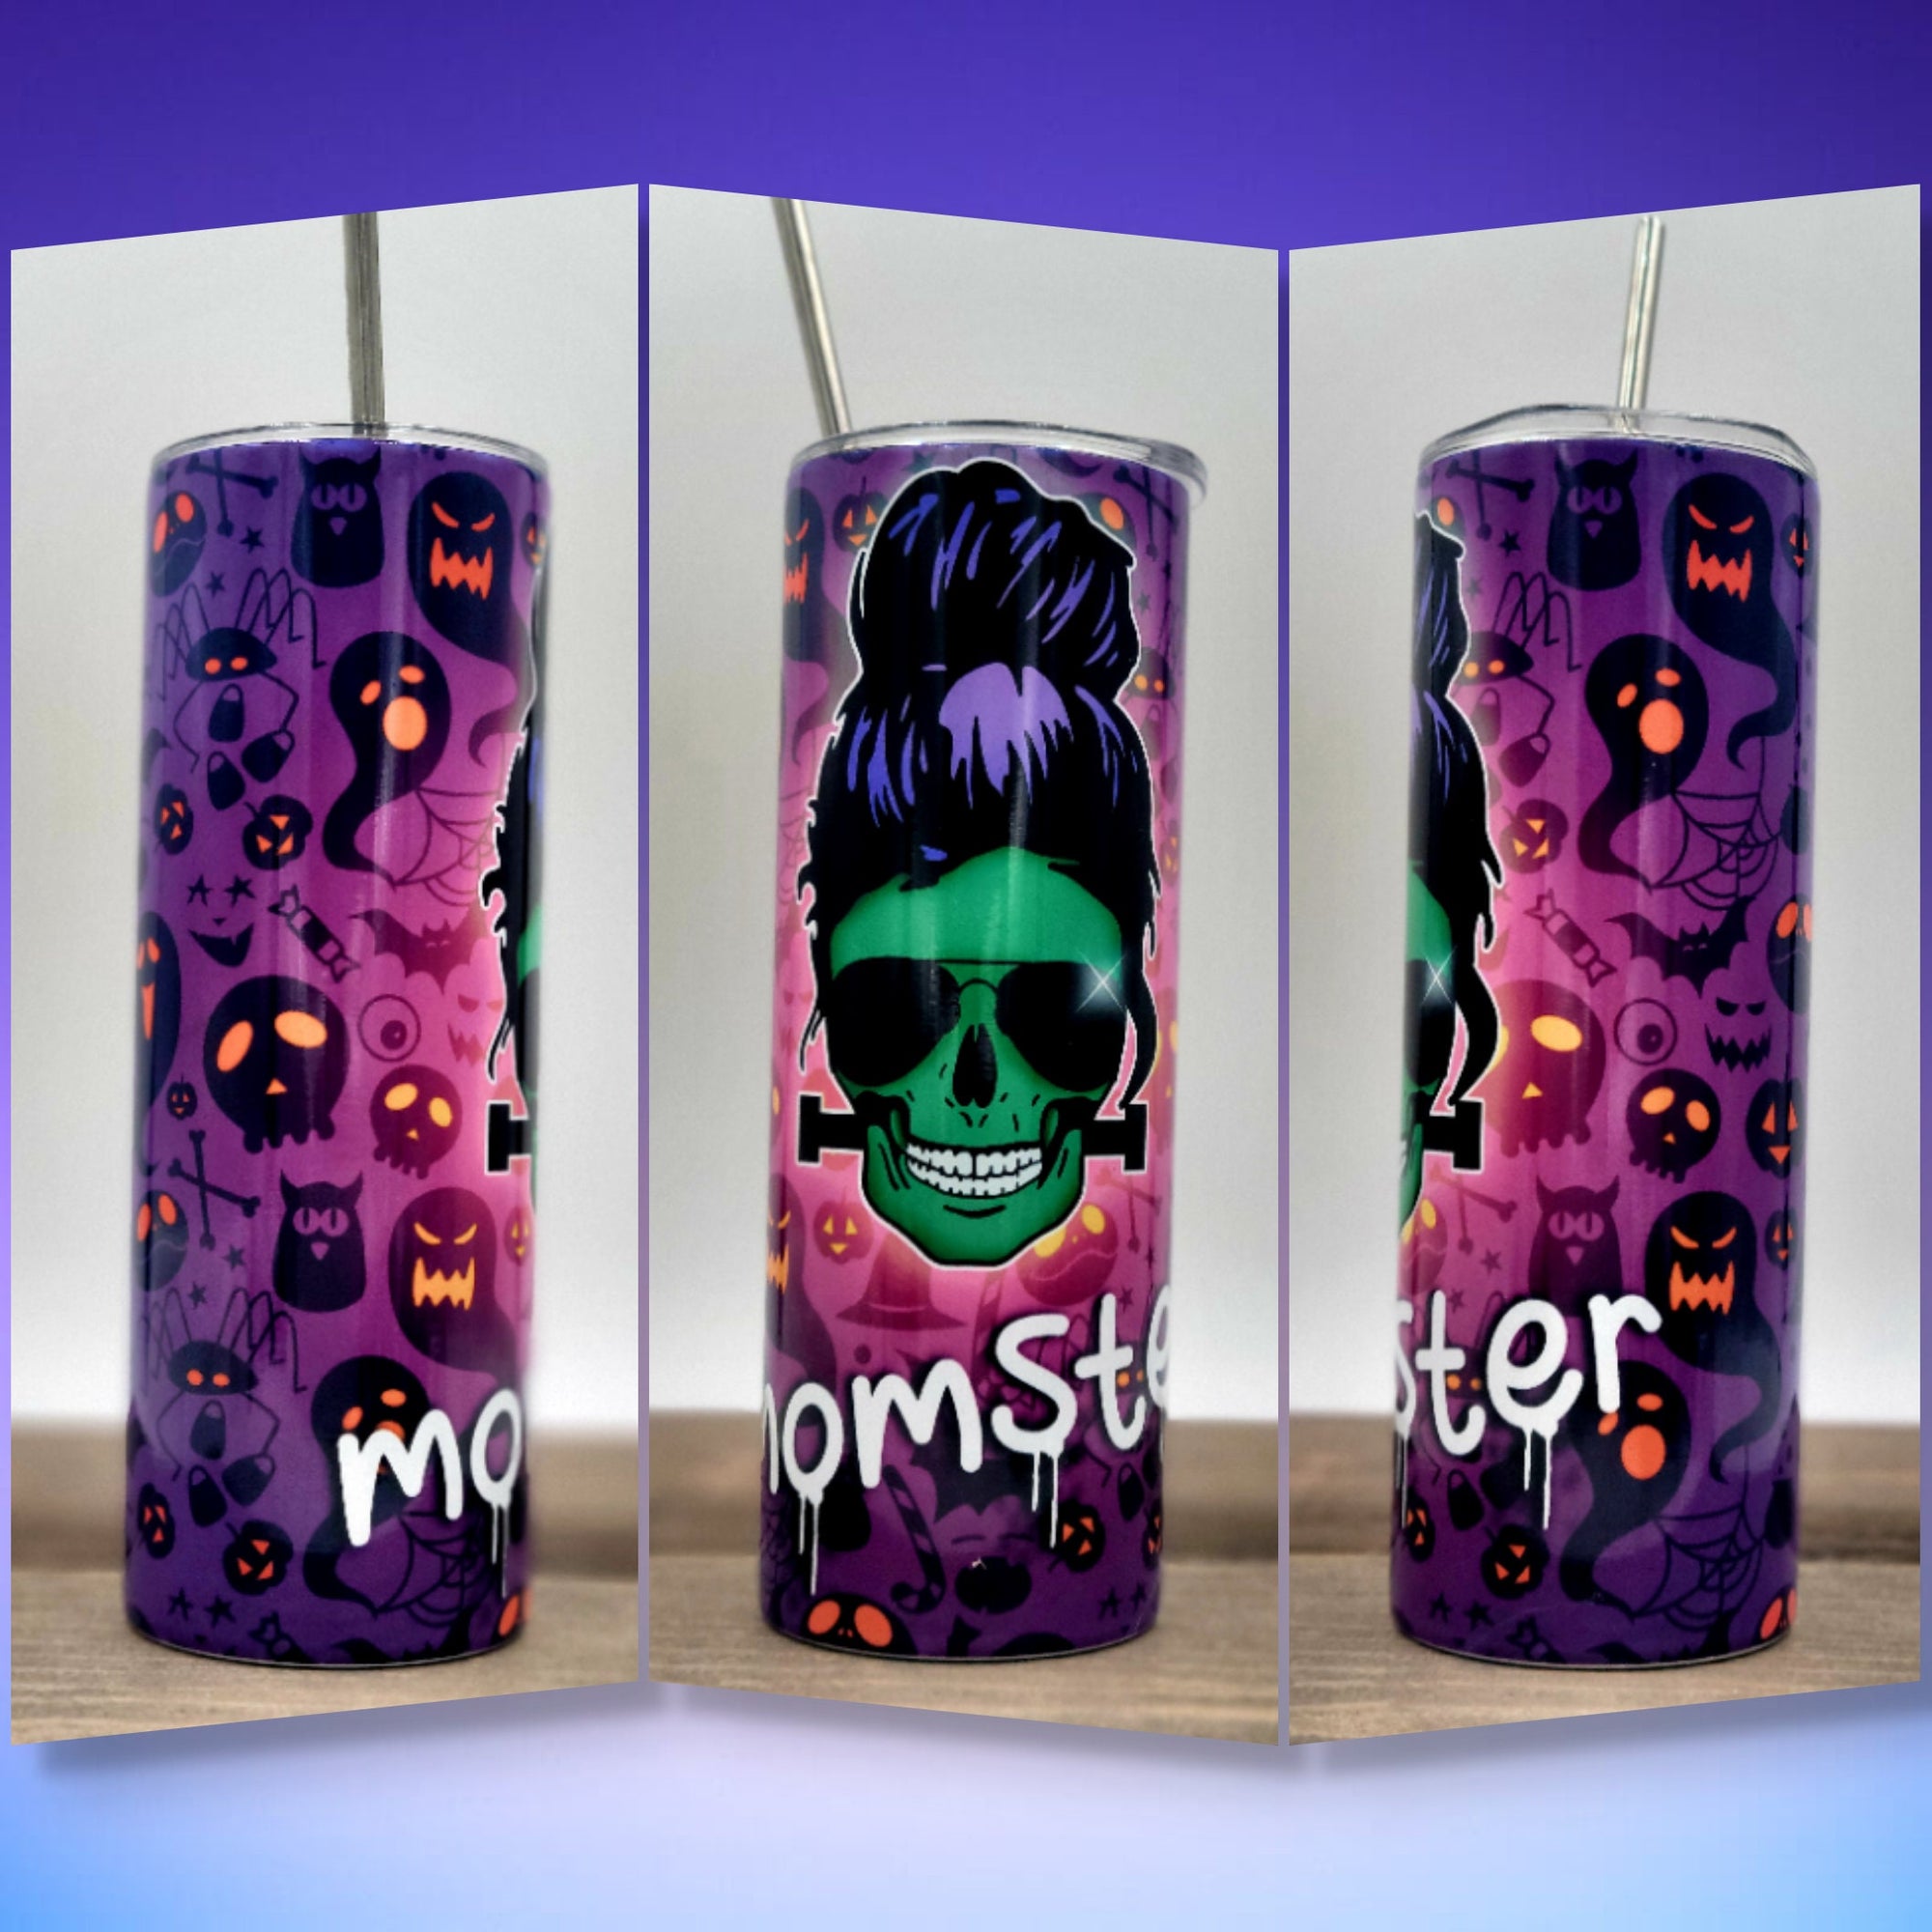 Momster Tumbler Cup, Halloween Tumbler, Fall Tumbler, Halloween Cups, Ghost Tumbler, Pumpkin Tumbler, Spooky Tumbler, Spooky Cup